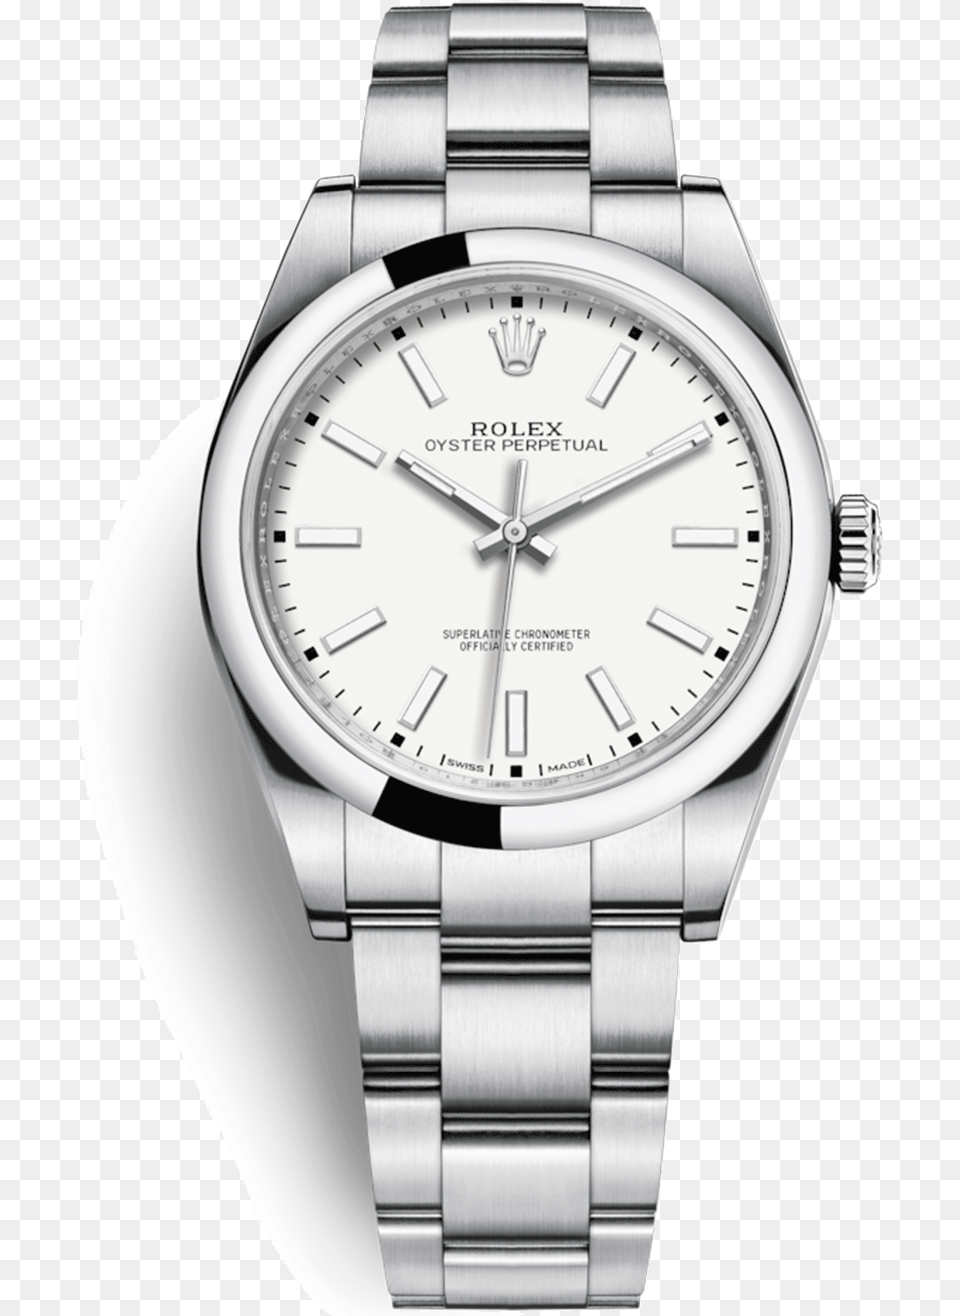 Rolex Oyster Perpetual 39 0004 Rolex Oyster Perpetual White, Arm, Body Part, Person, Wristwatch Png Image